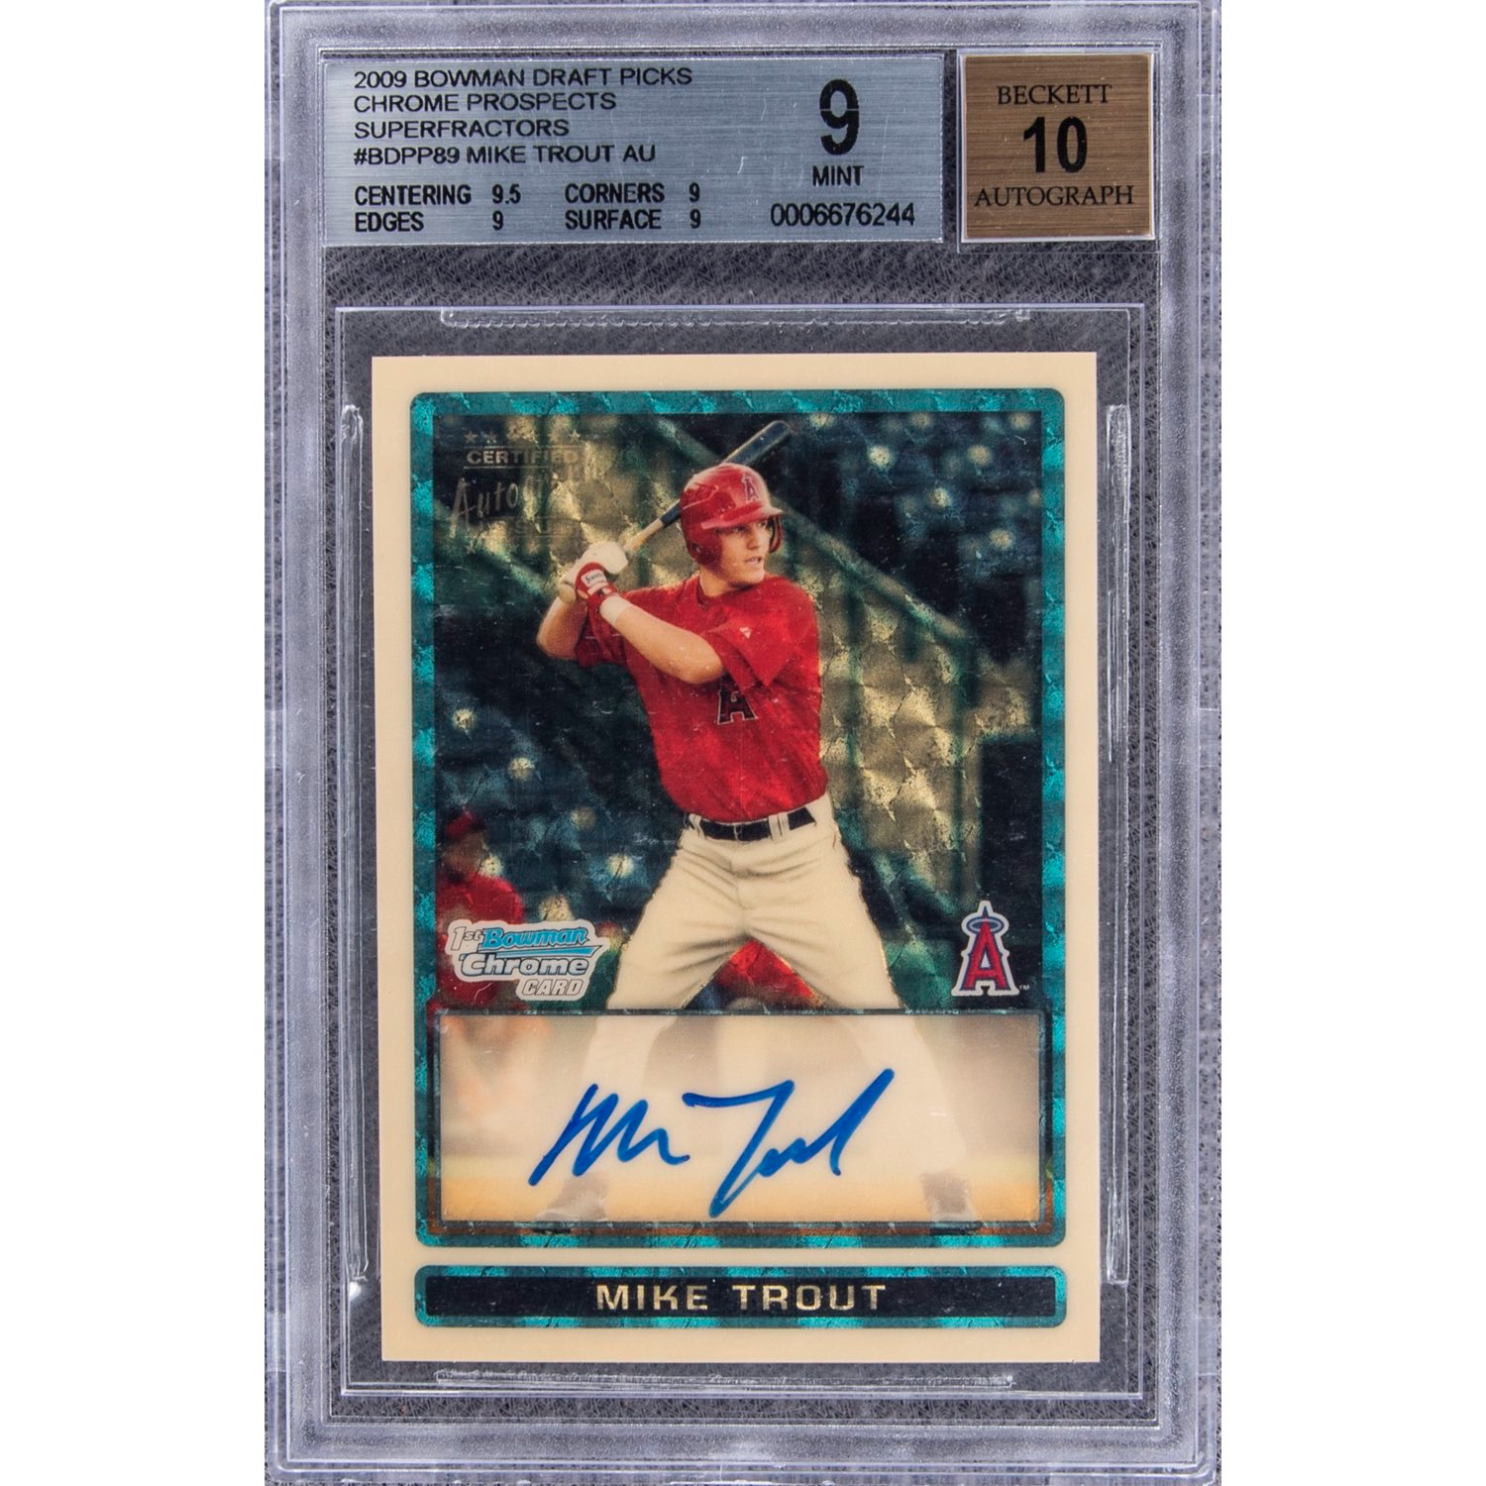 Sold at Auction: Mike Trout signed and practiced with Baseball